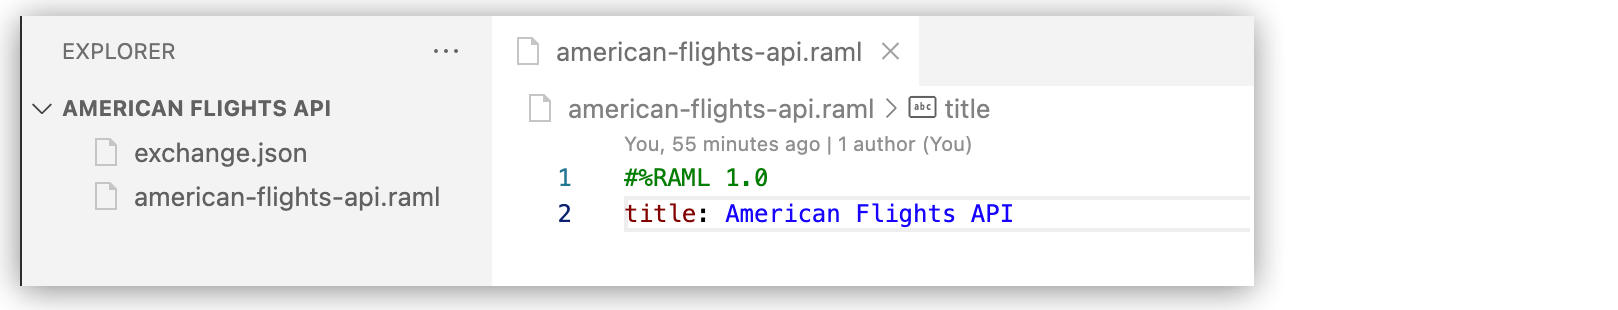 Project for American Airlines API